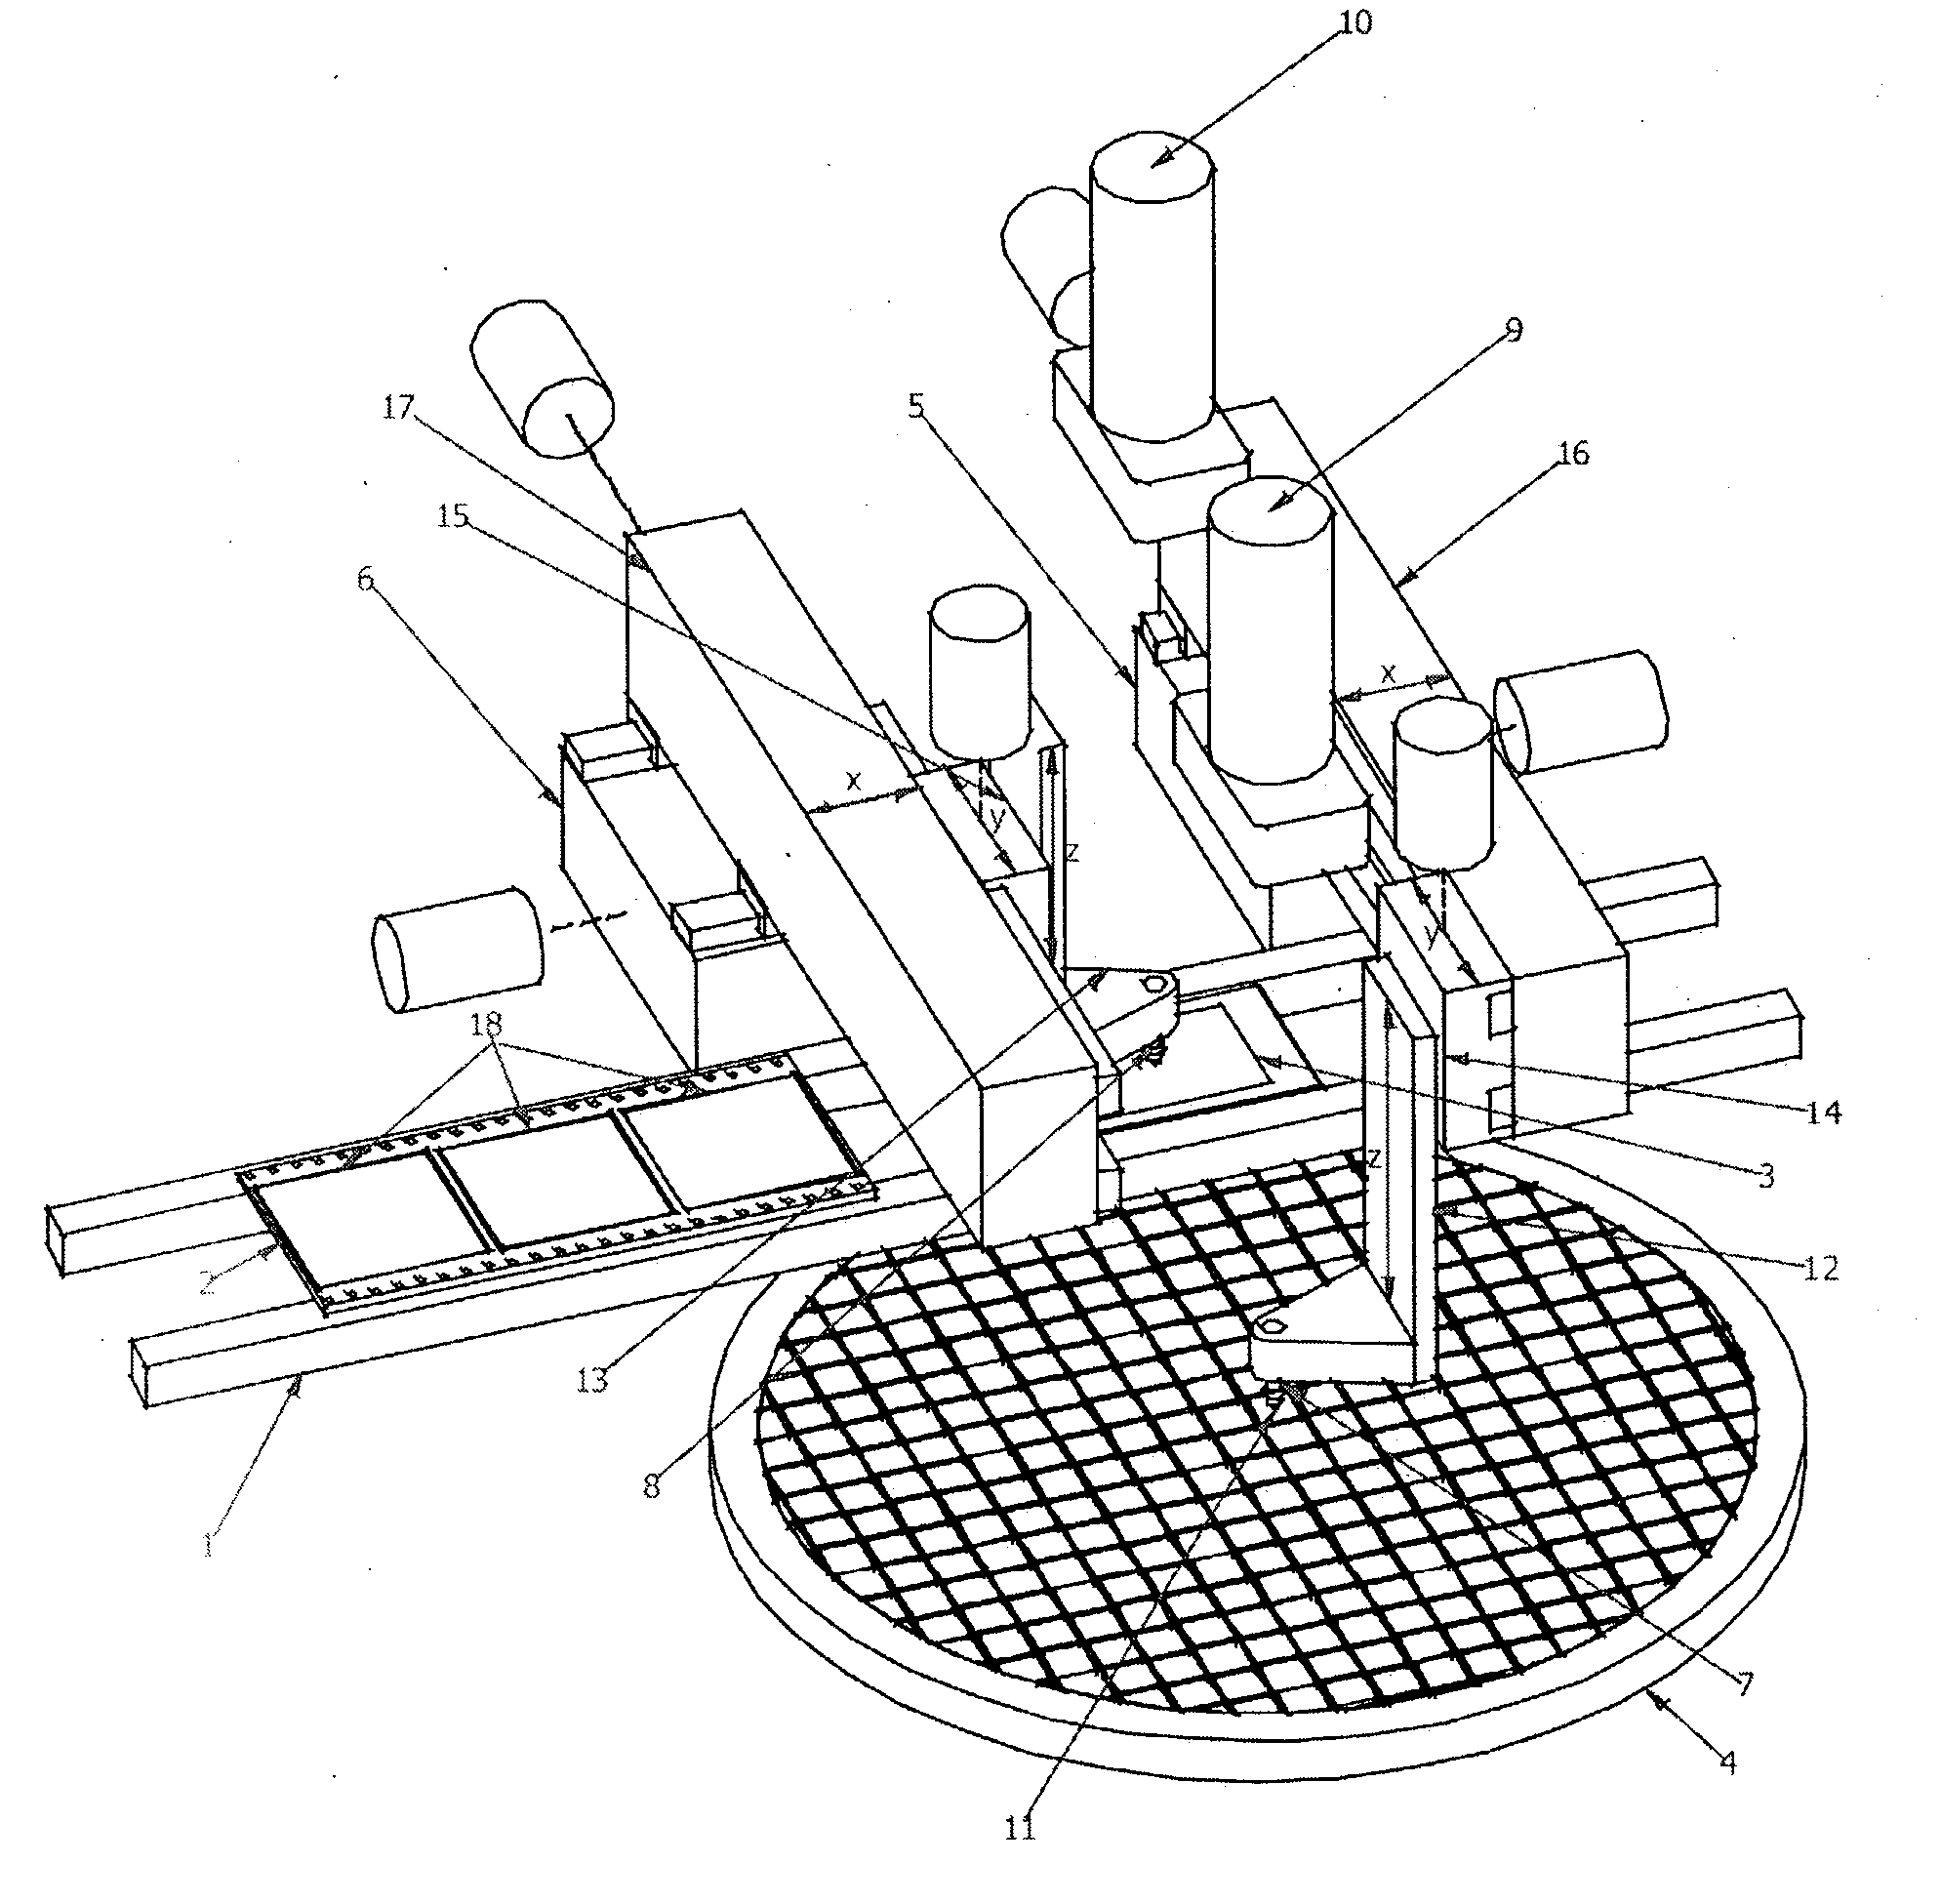 Semiconductor apparatus with multiple delivery devices for components